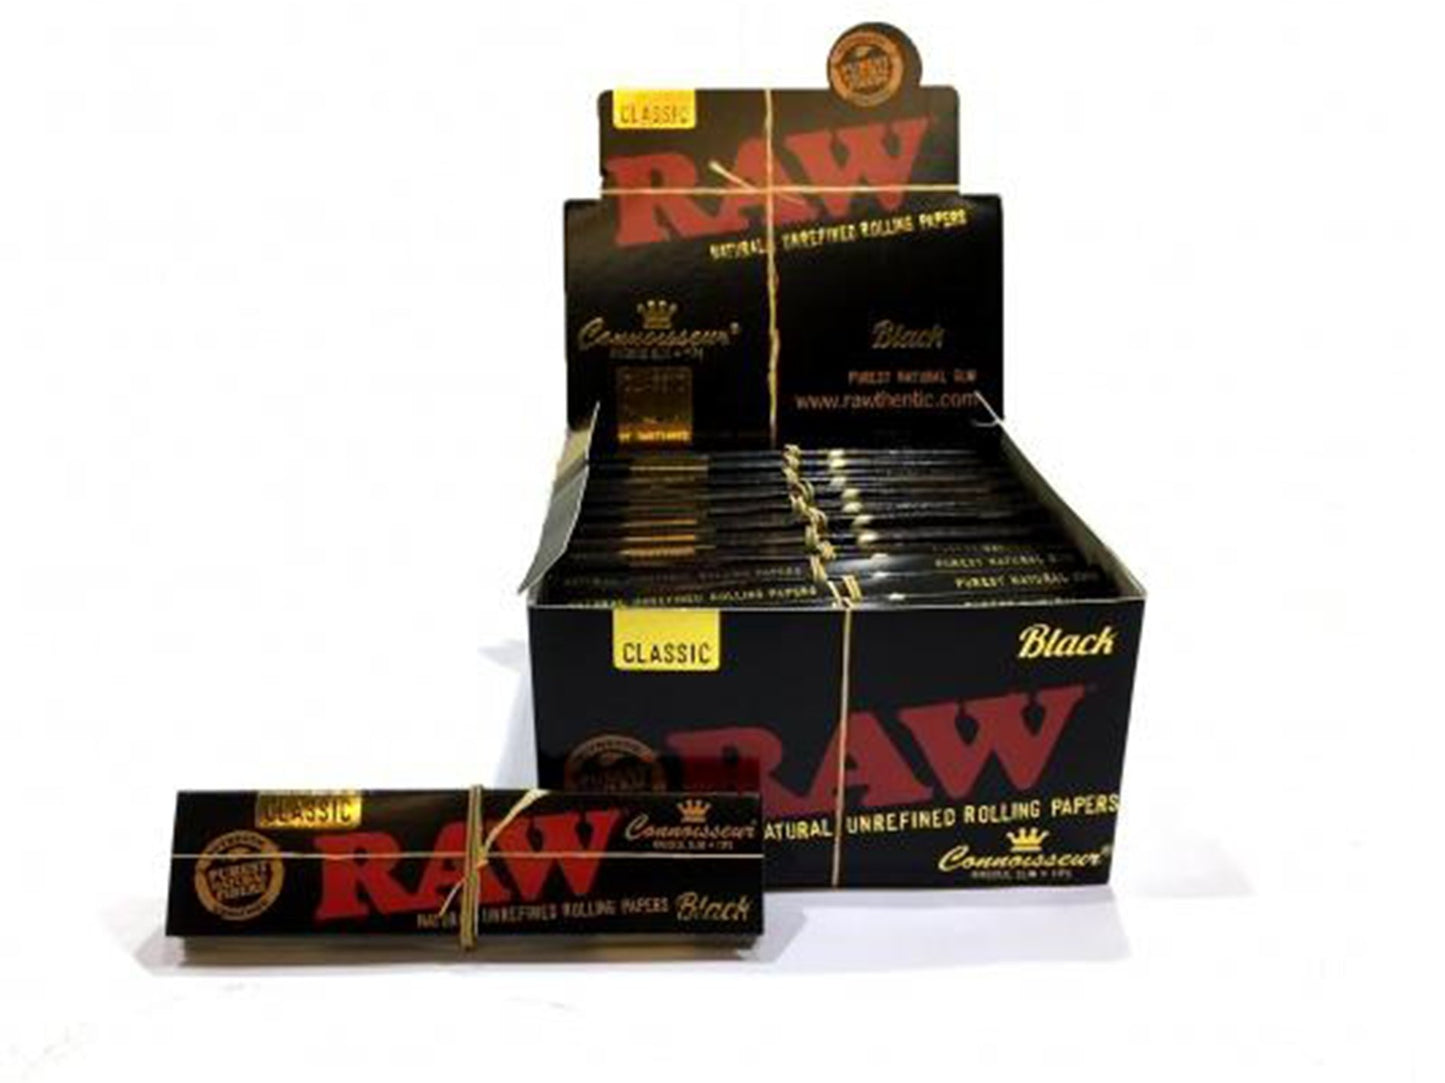 RAW Black Classic Connoisseur King Size Slim Rolling Papers & Tips - VIR Wholesale